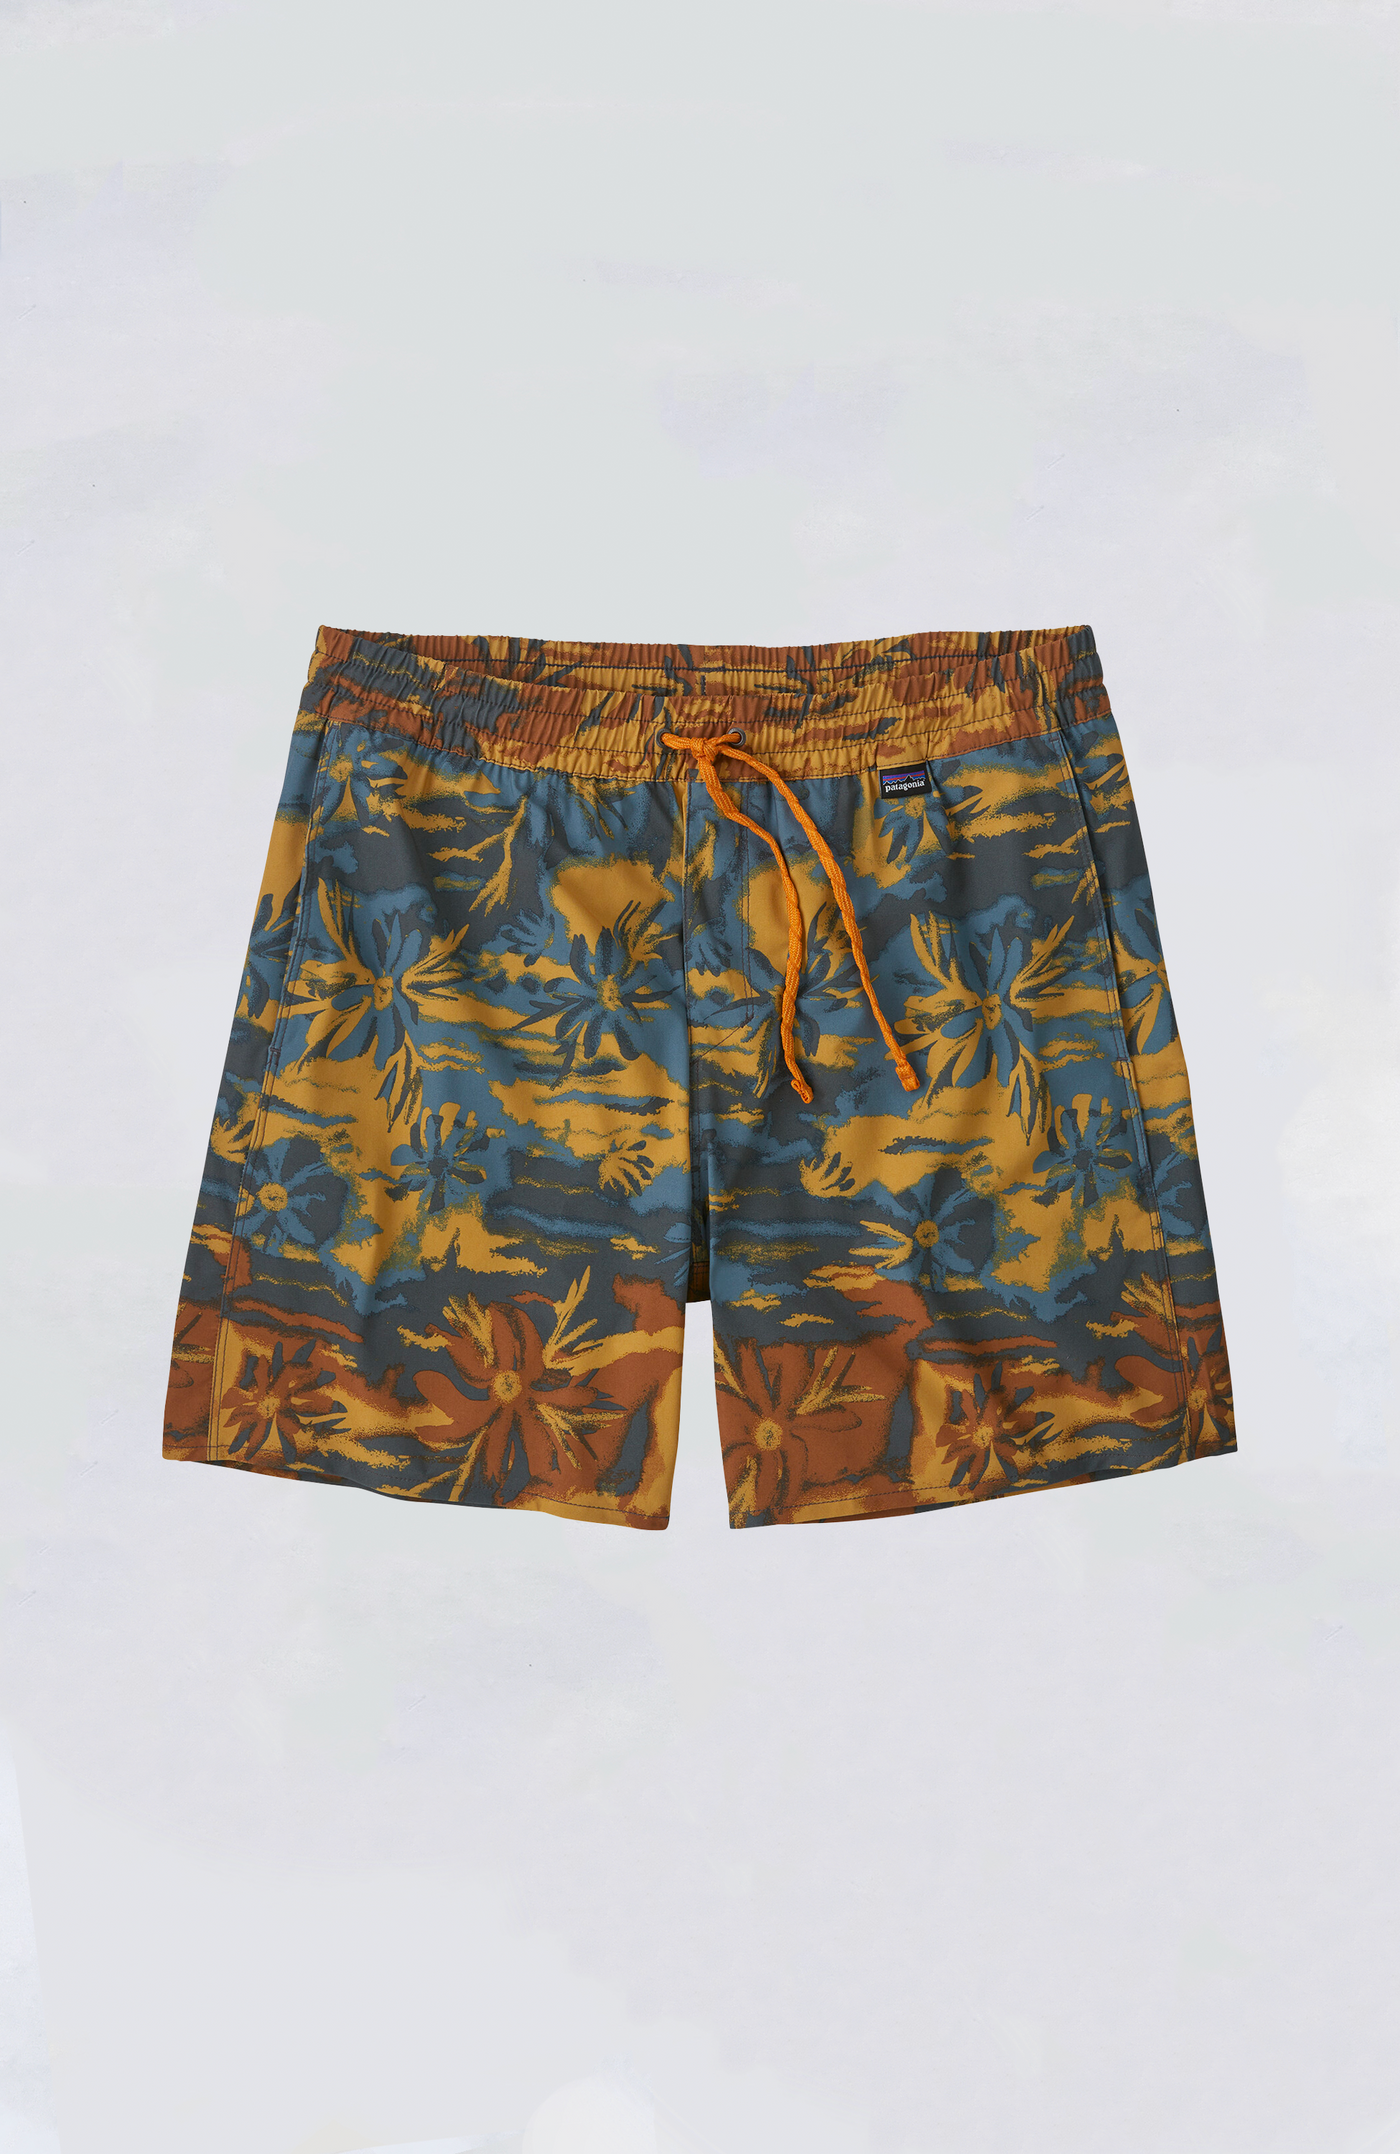 Patagonia Shorts - M's Hydropeak Volley Shorts - 16 in.